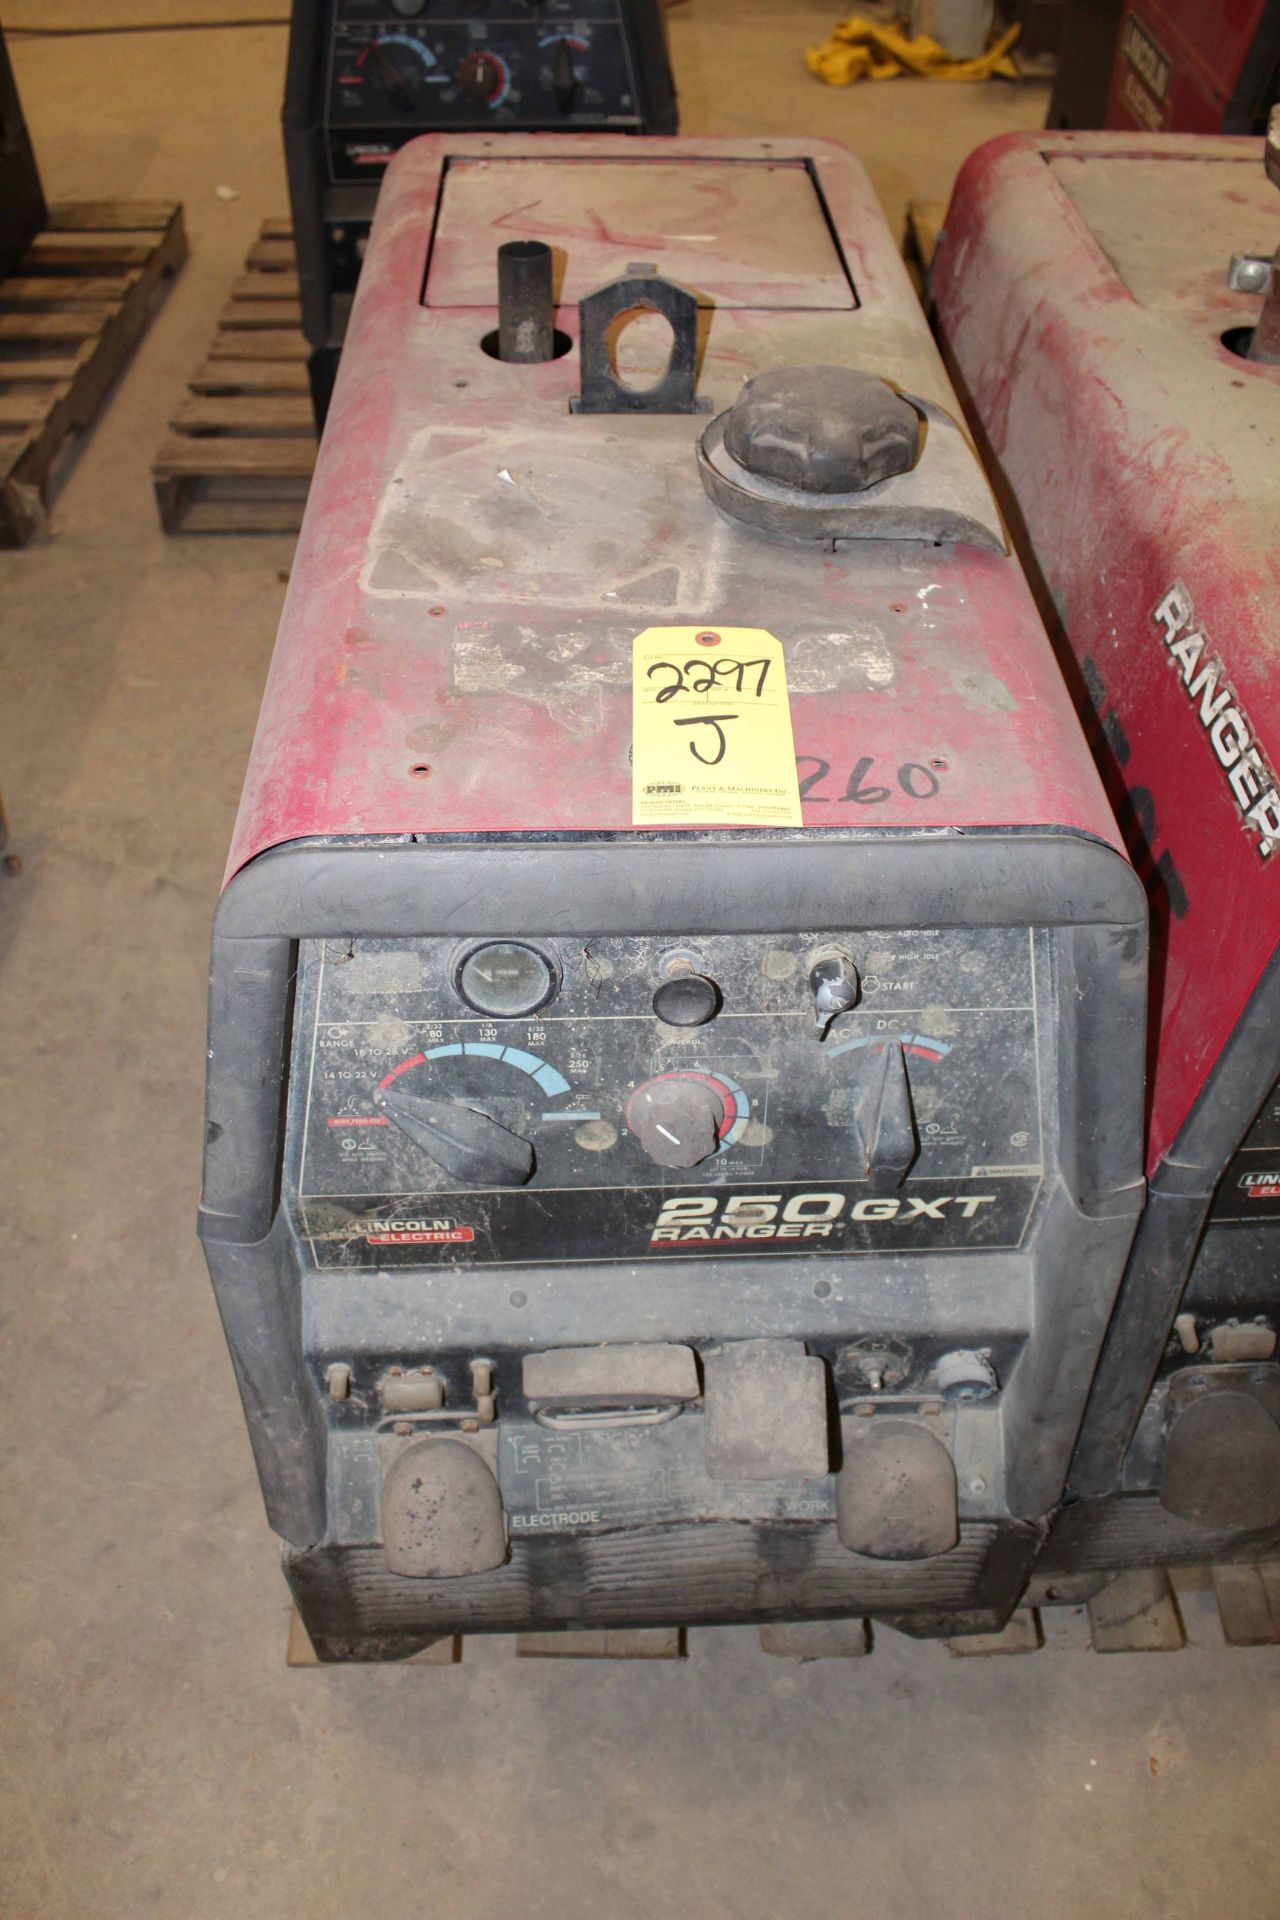 PORTABLE WELDER, LINCOLN MDL. RANGER 250GXT, gasoline pwrd., S/N N.A. (out of service)